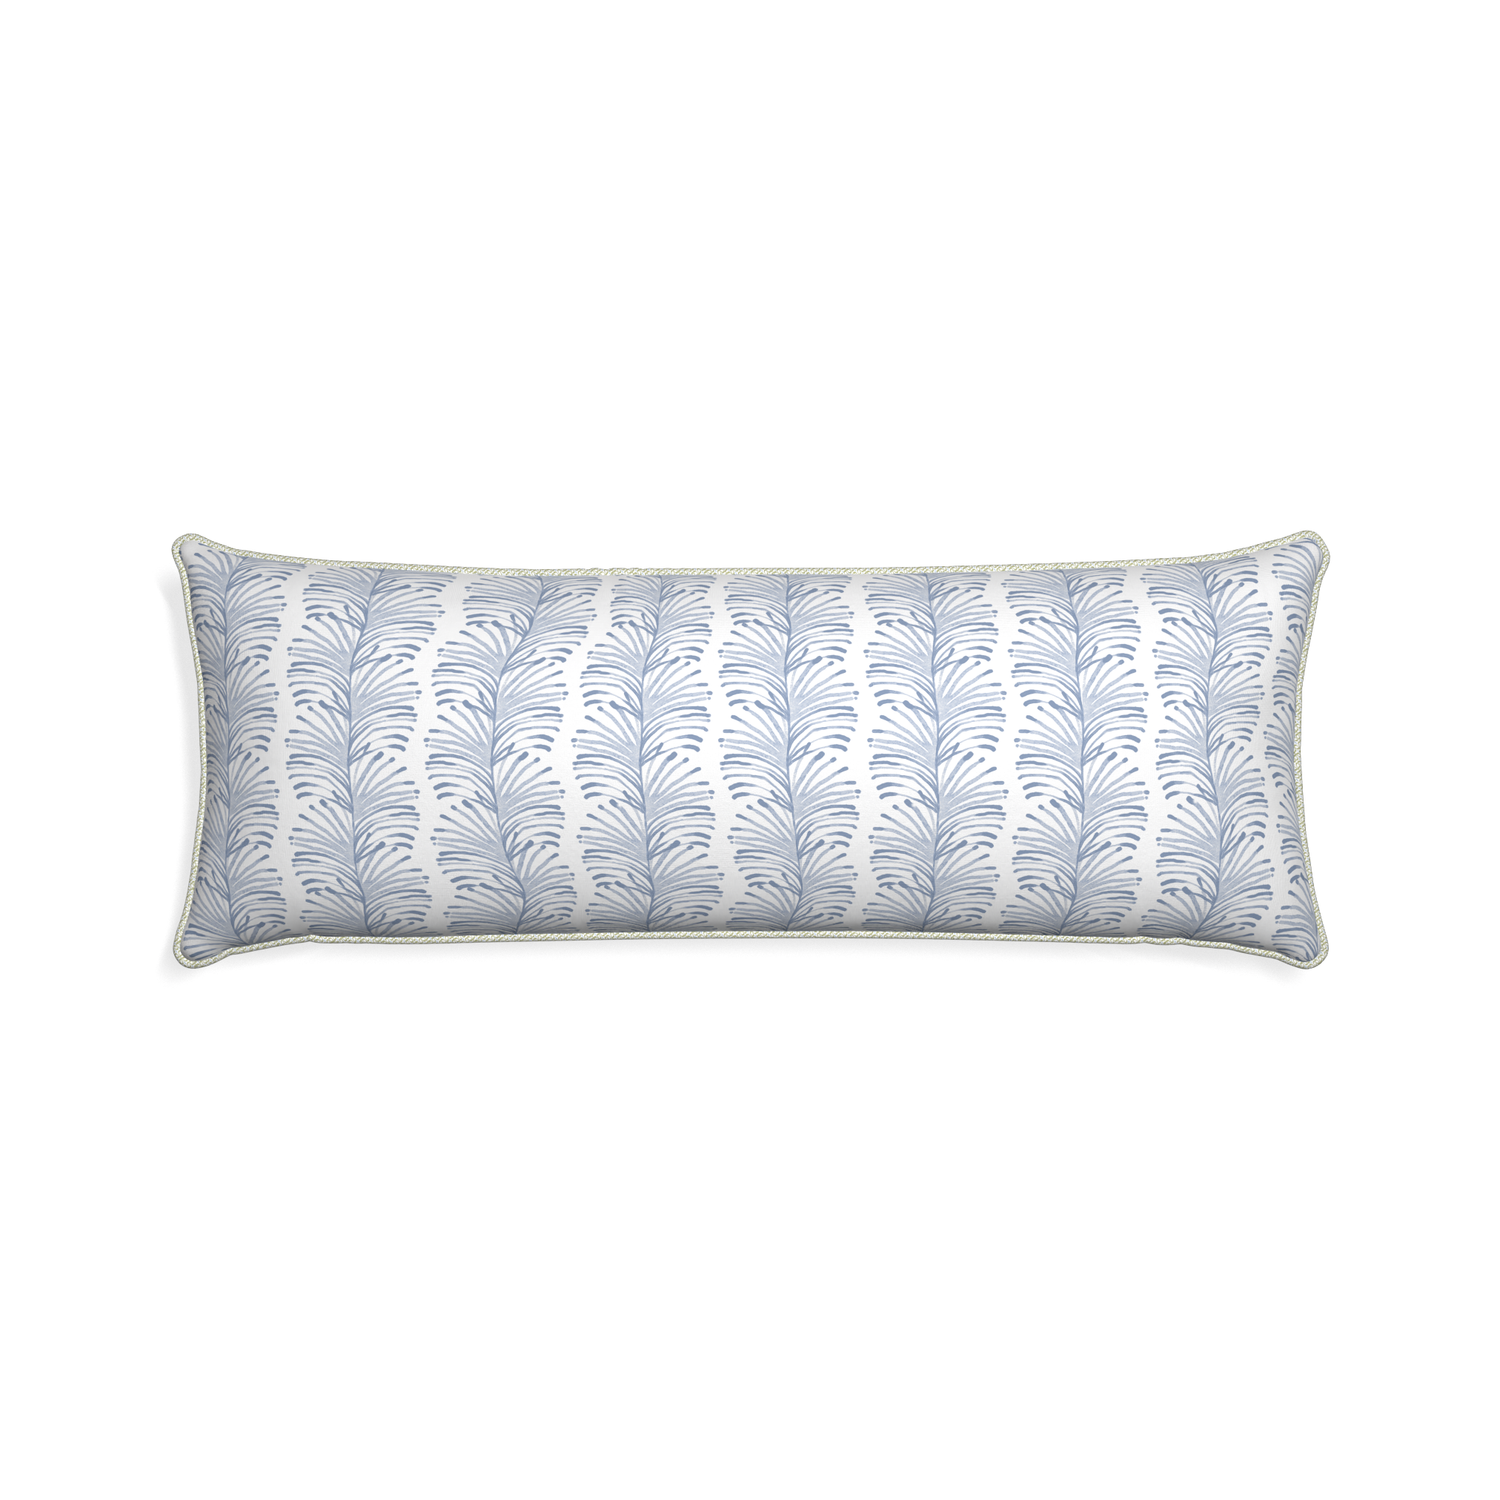 Xl-lumbar emma sky custom pillow with l piping on white background